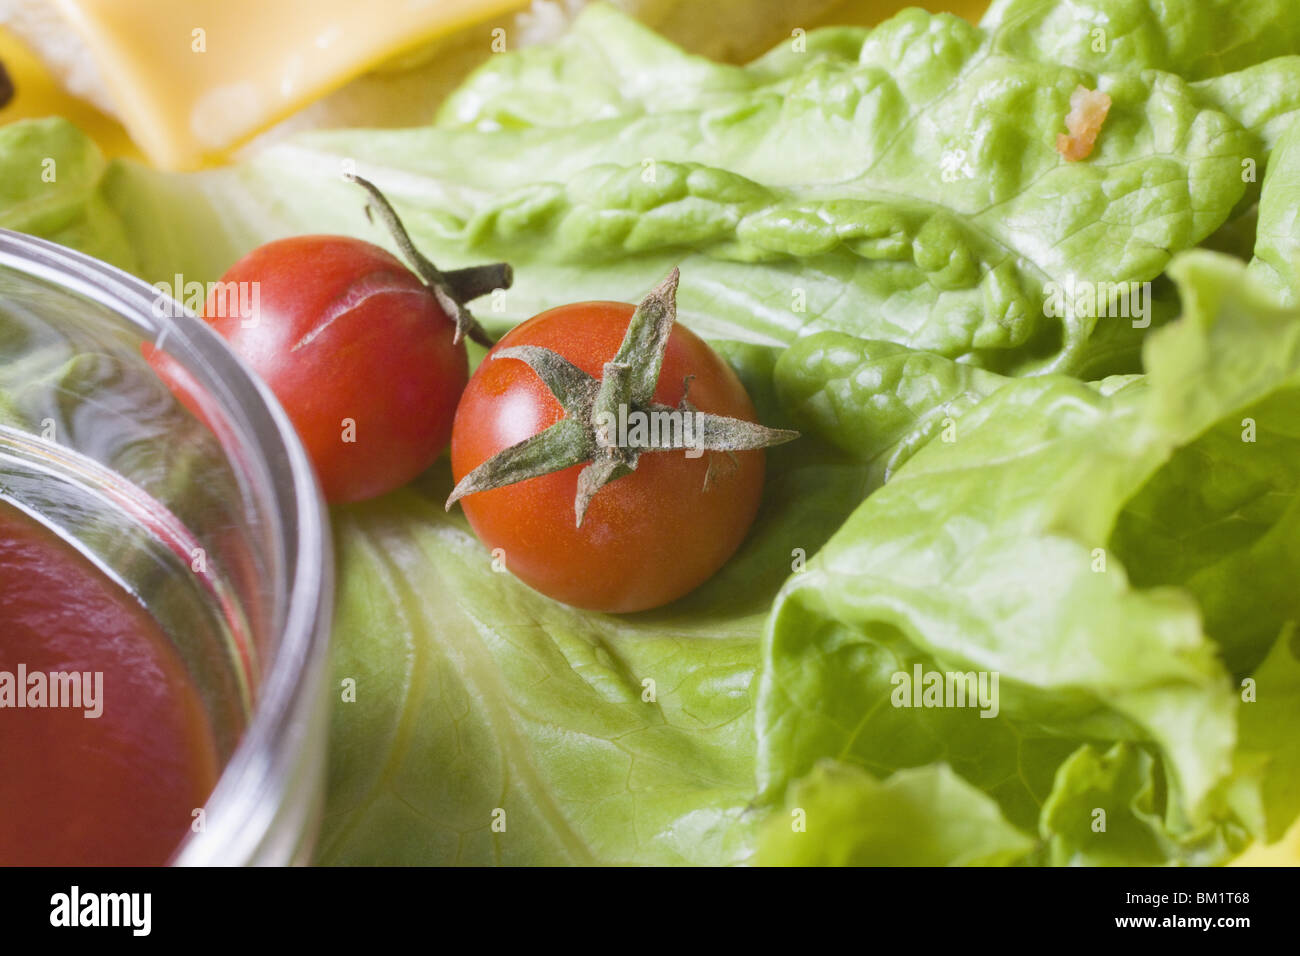 Close-up of cherry tomatoes on lettuce Stock Photo